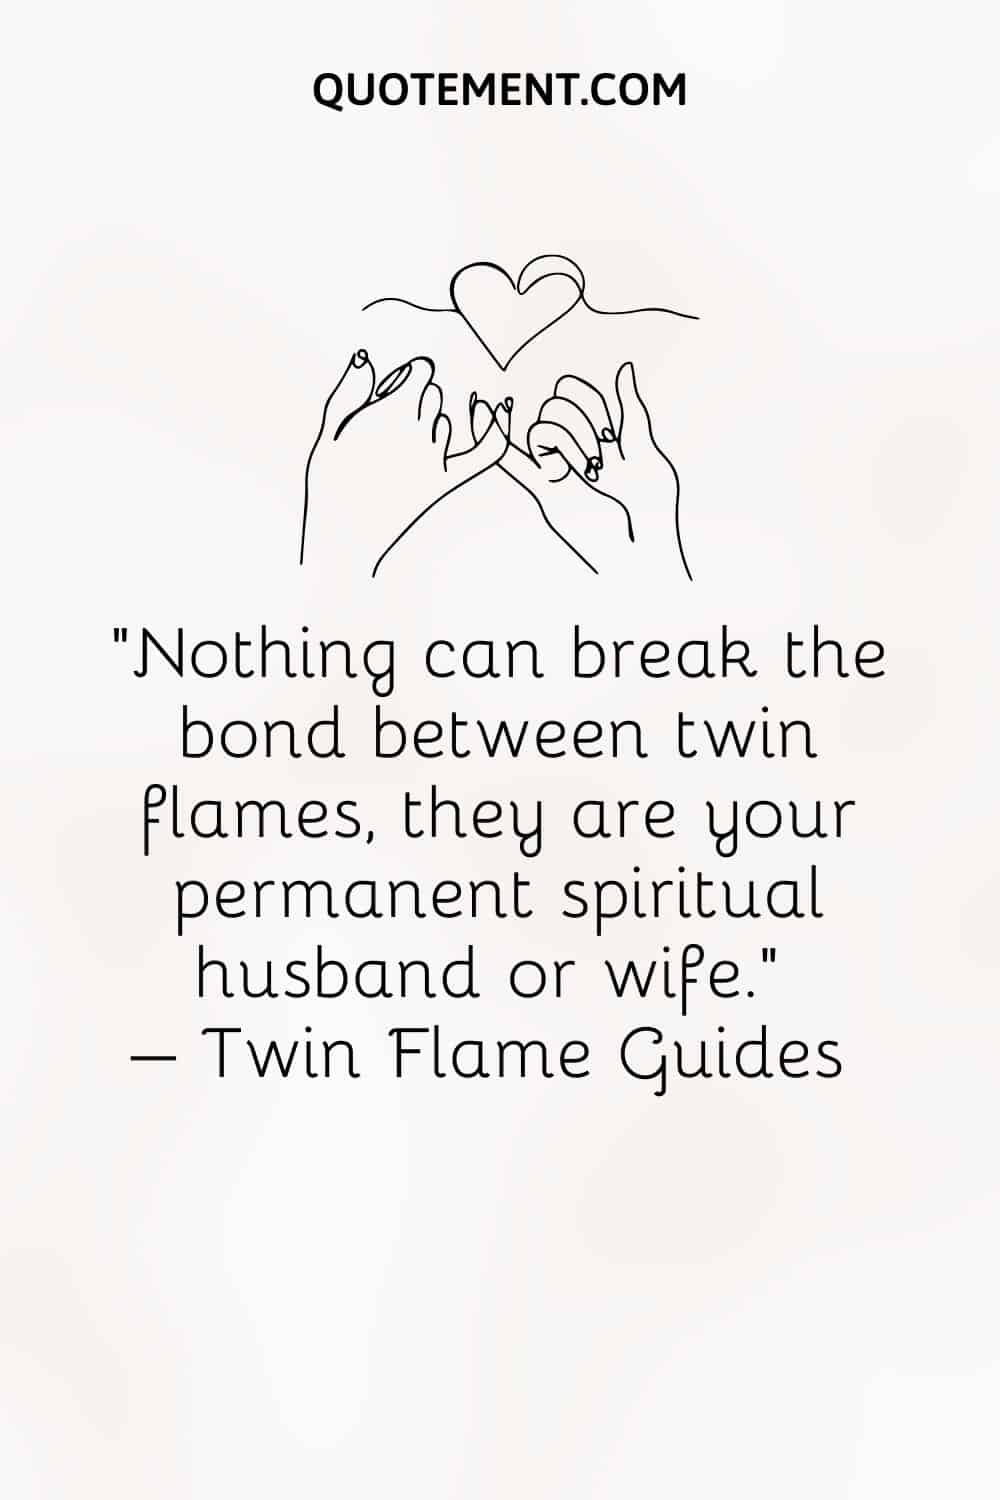 Nothing can break the bond between twin flames, they are your permanent spiritual husband or wife